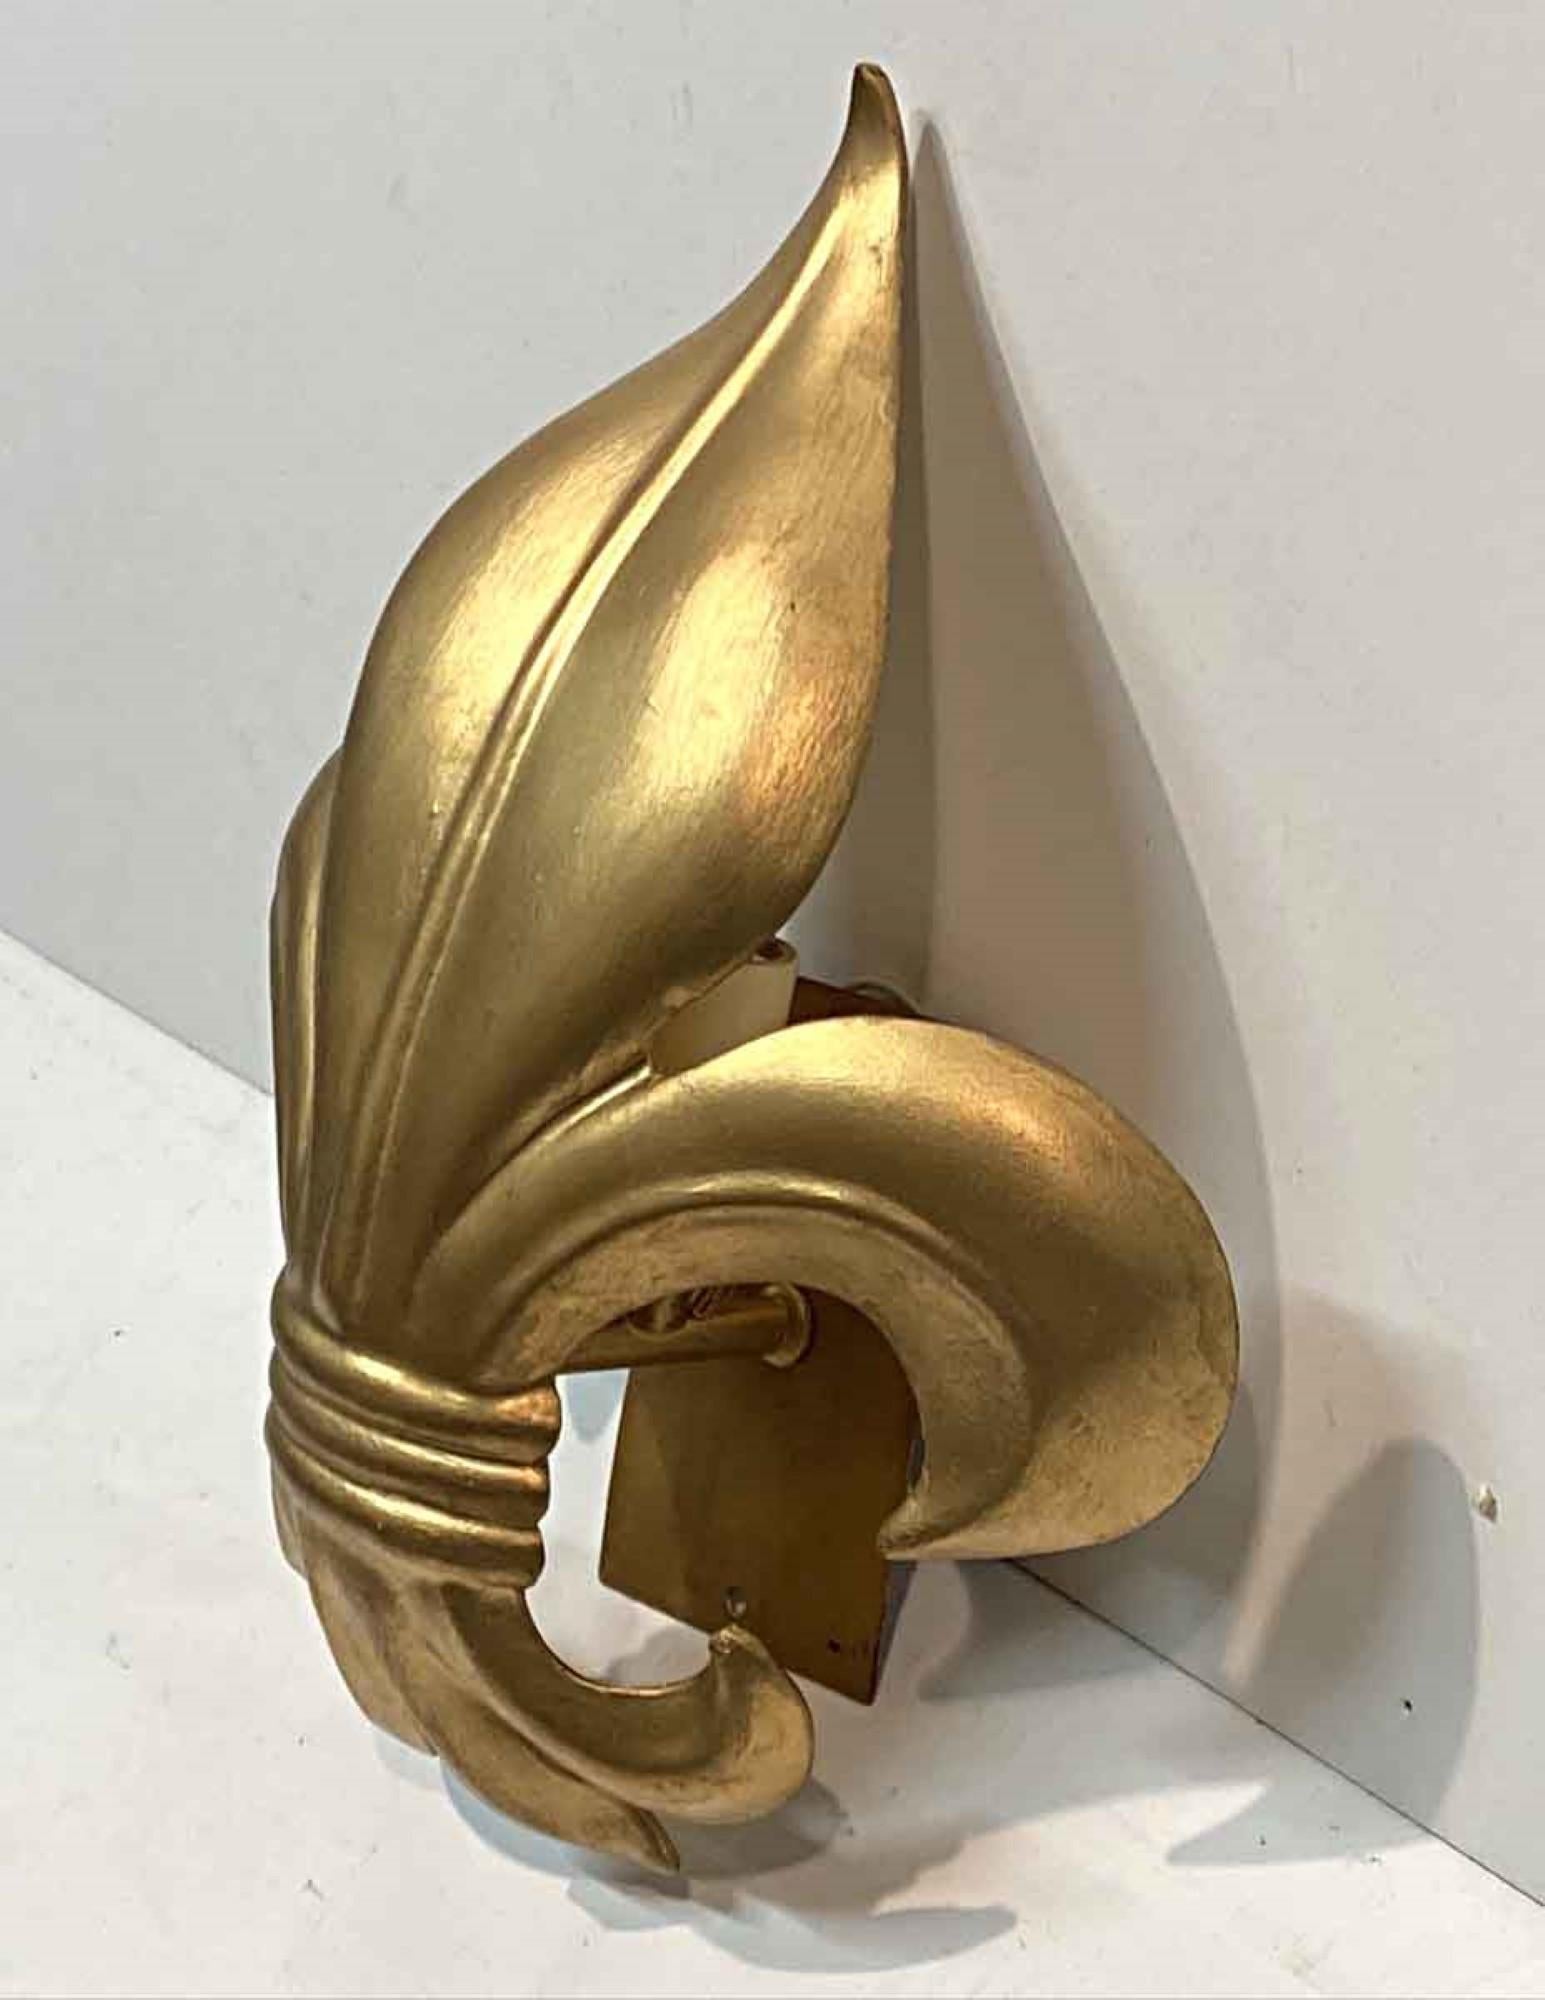 1990s fleur-de-lis single light wall sconce featuring a gold leaf finish. Cleaned and rewired. Small quantity available at time of posting. Priced each. Please inquire. Please note, this item is located in our Scranton, PA location.